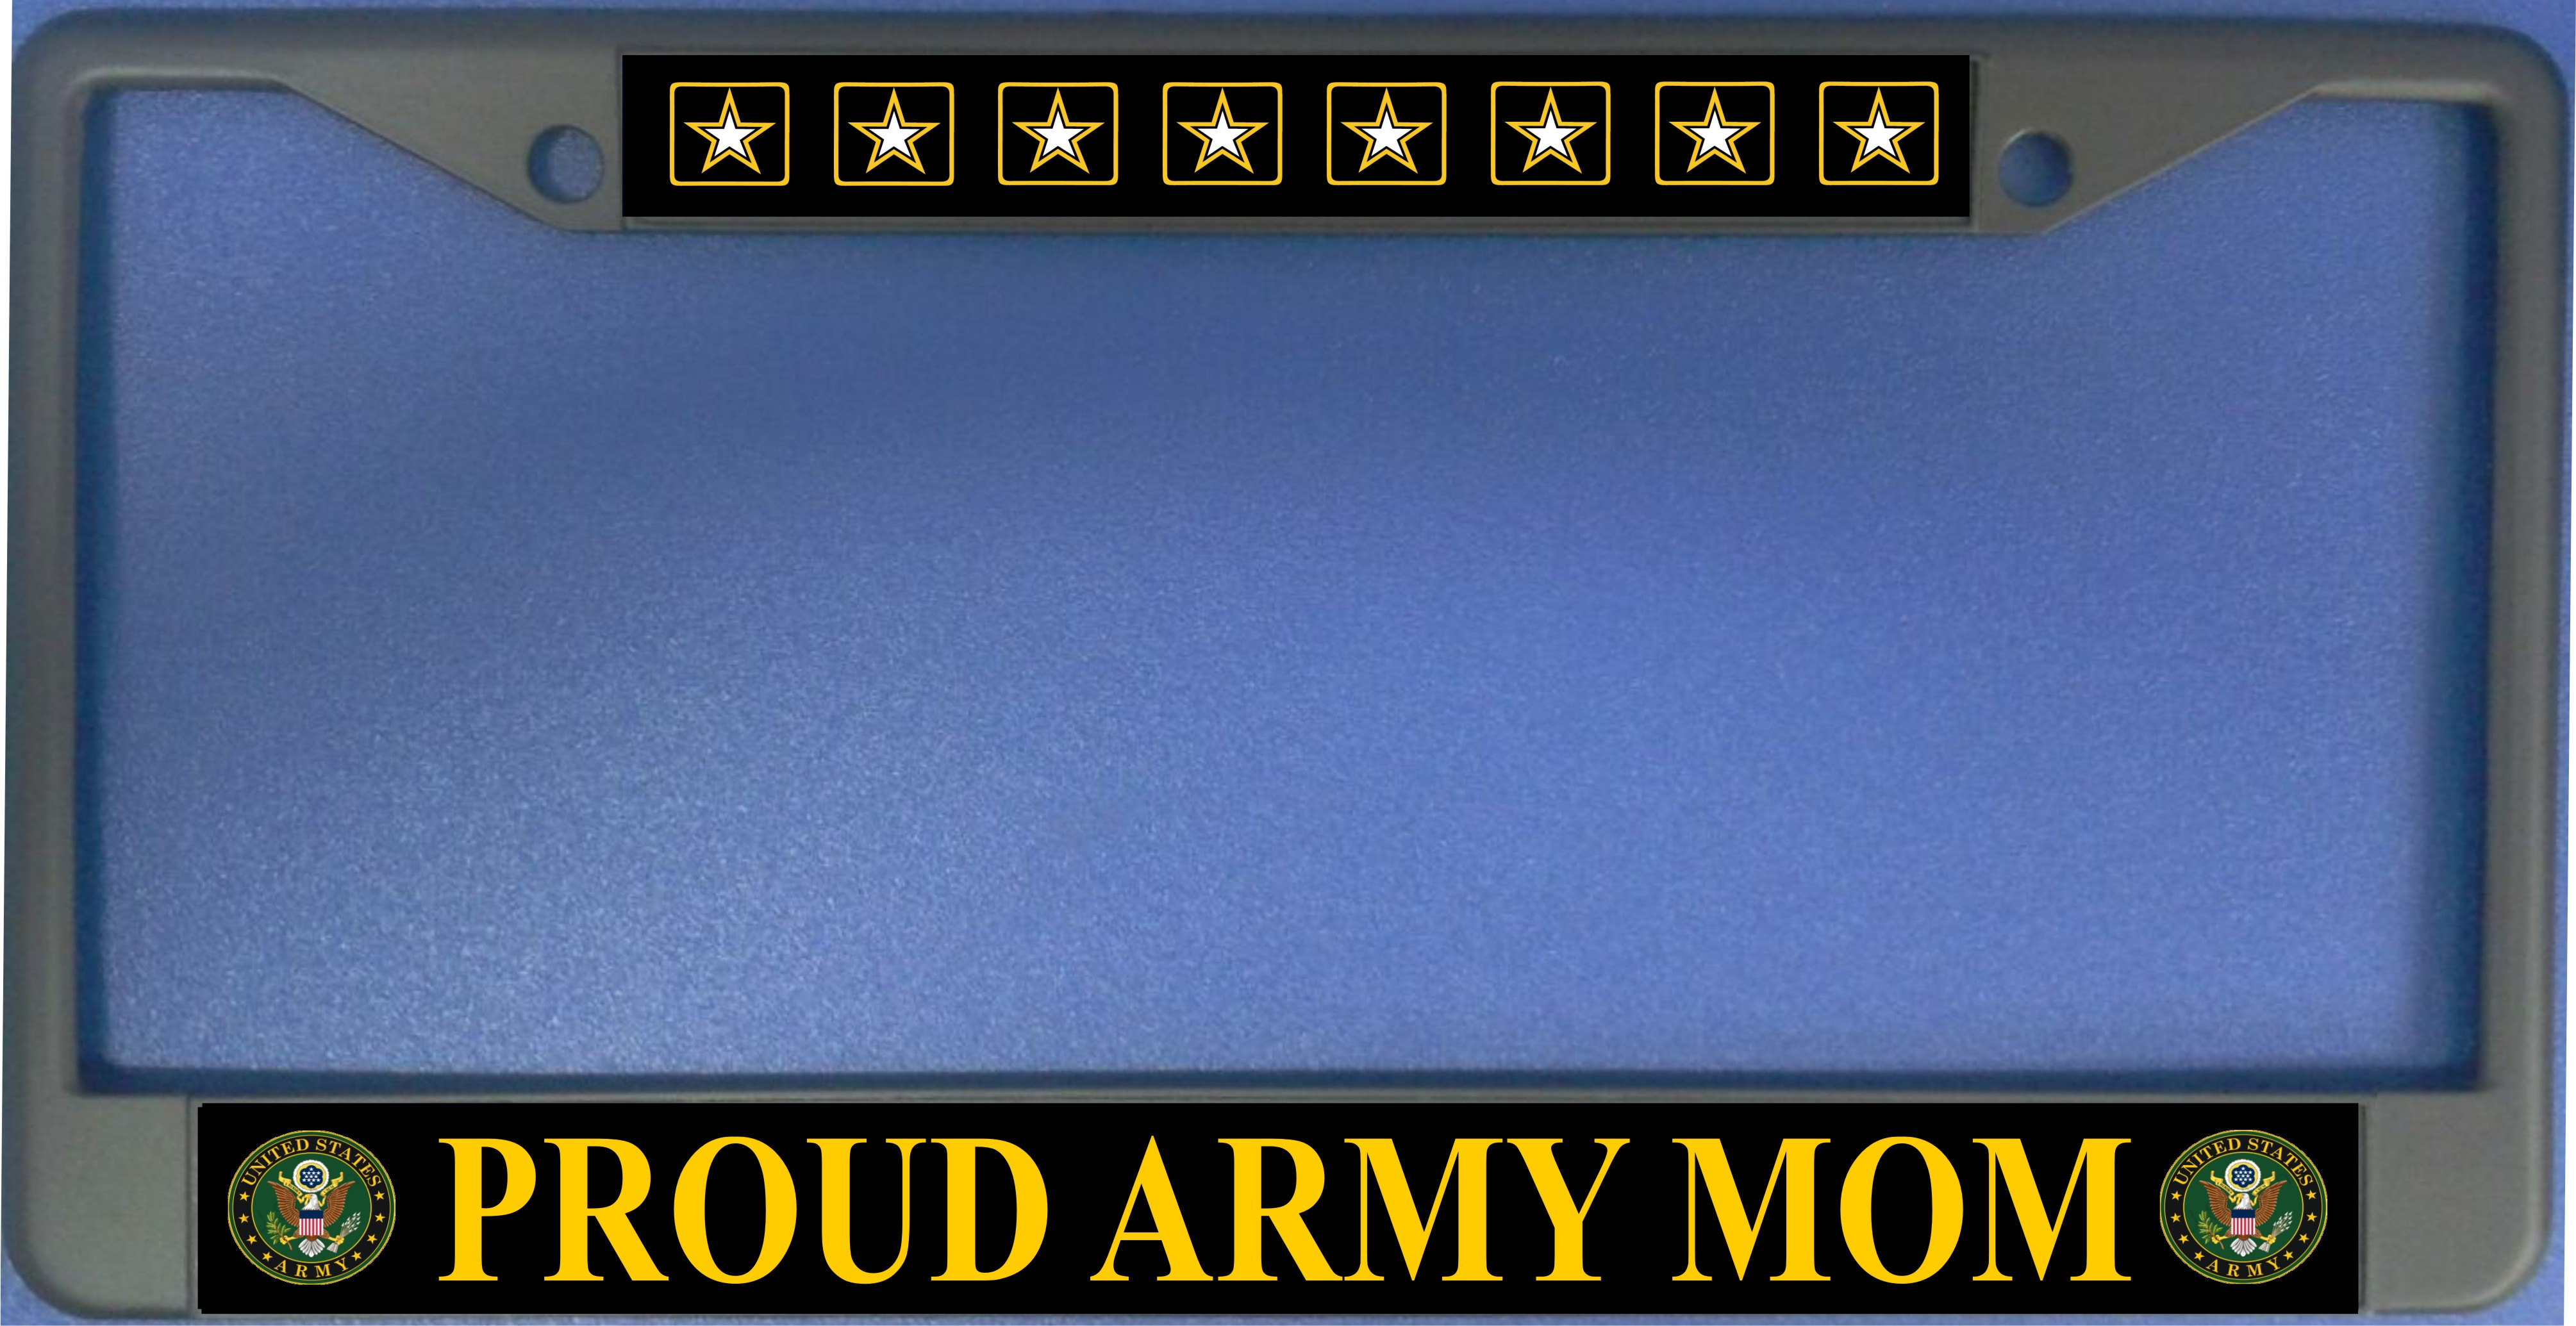 Proud ARMY Mom Photo License Plate Frame  Free Screw CAPs with this Frame